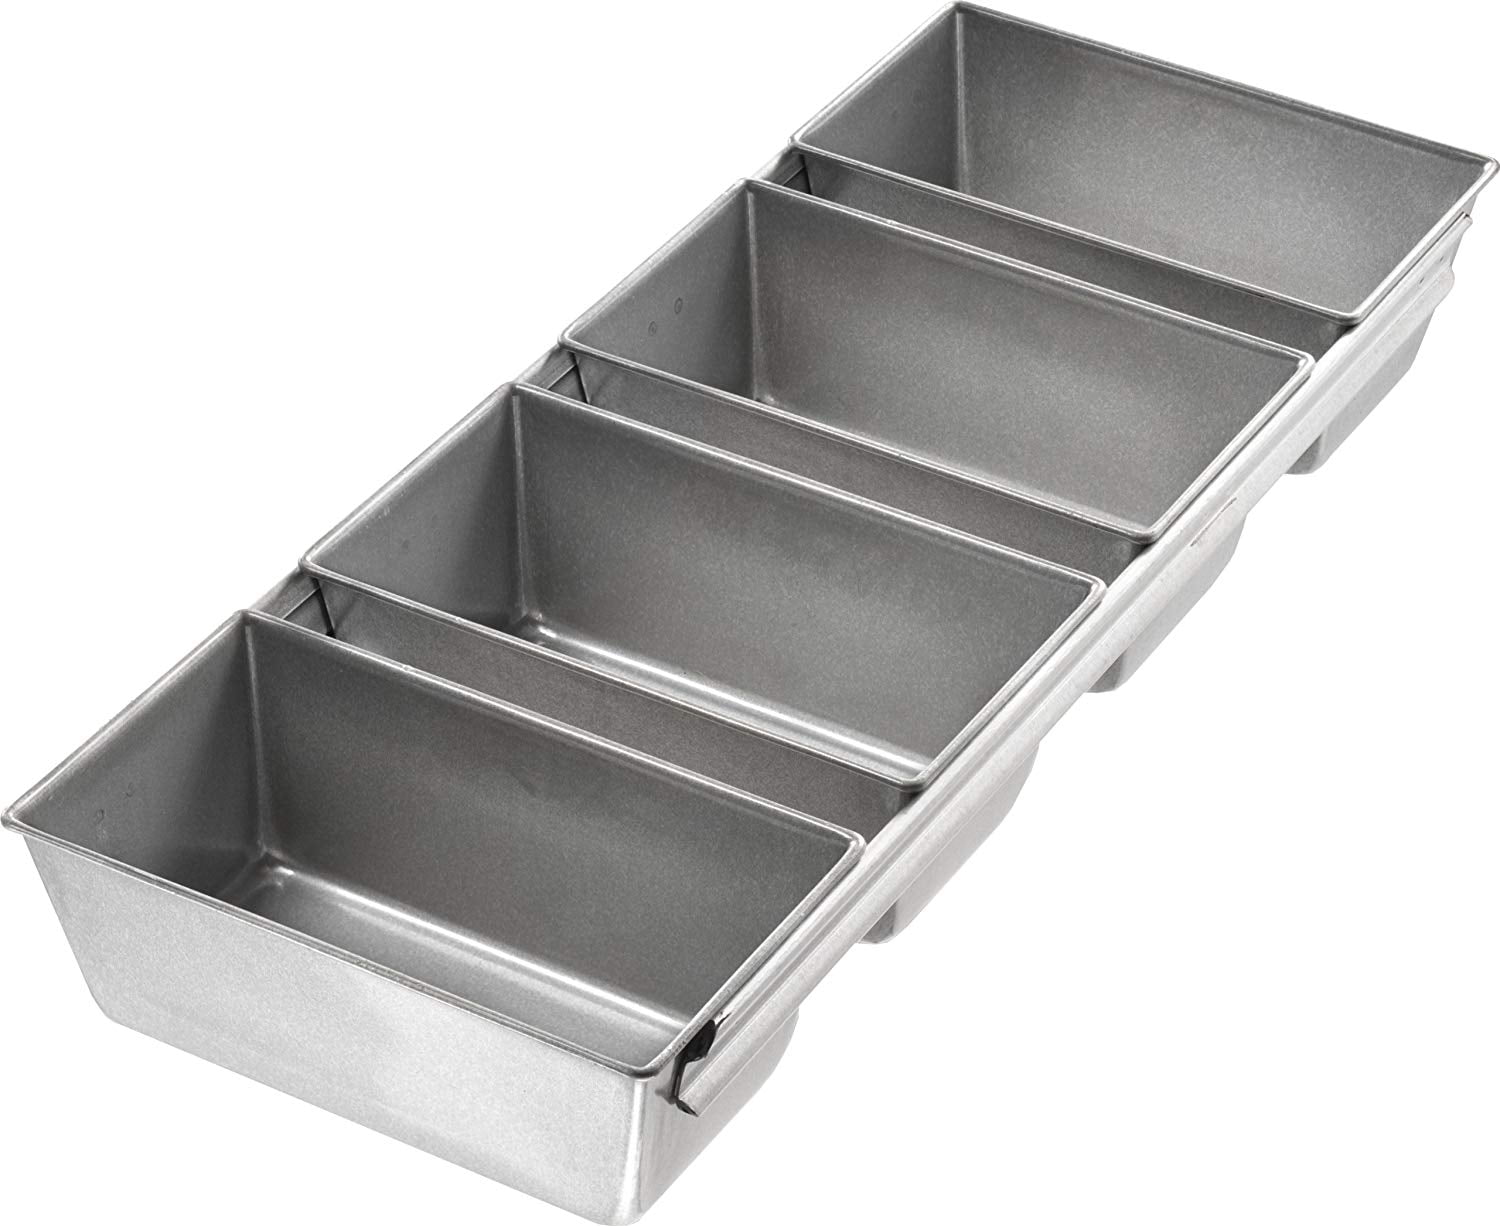 Mini Loaf Paper Baking Pan 25-Pack, 4 x 2 x 2 Inches